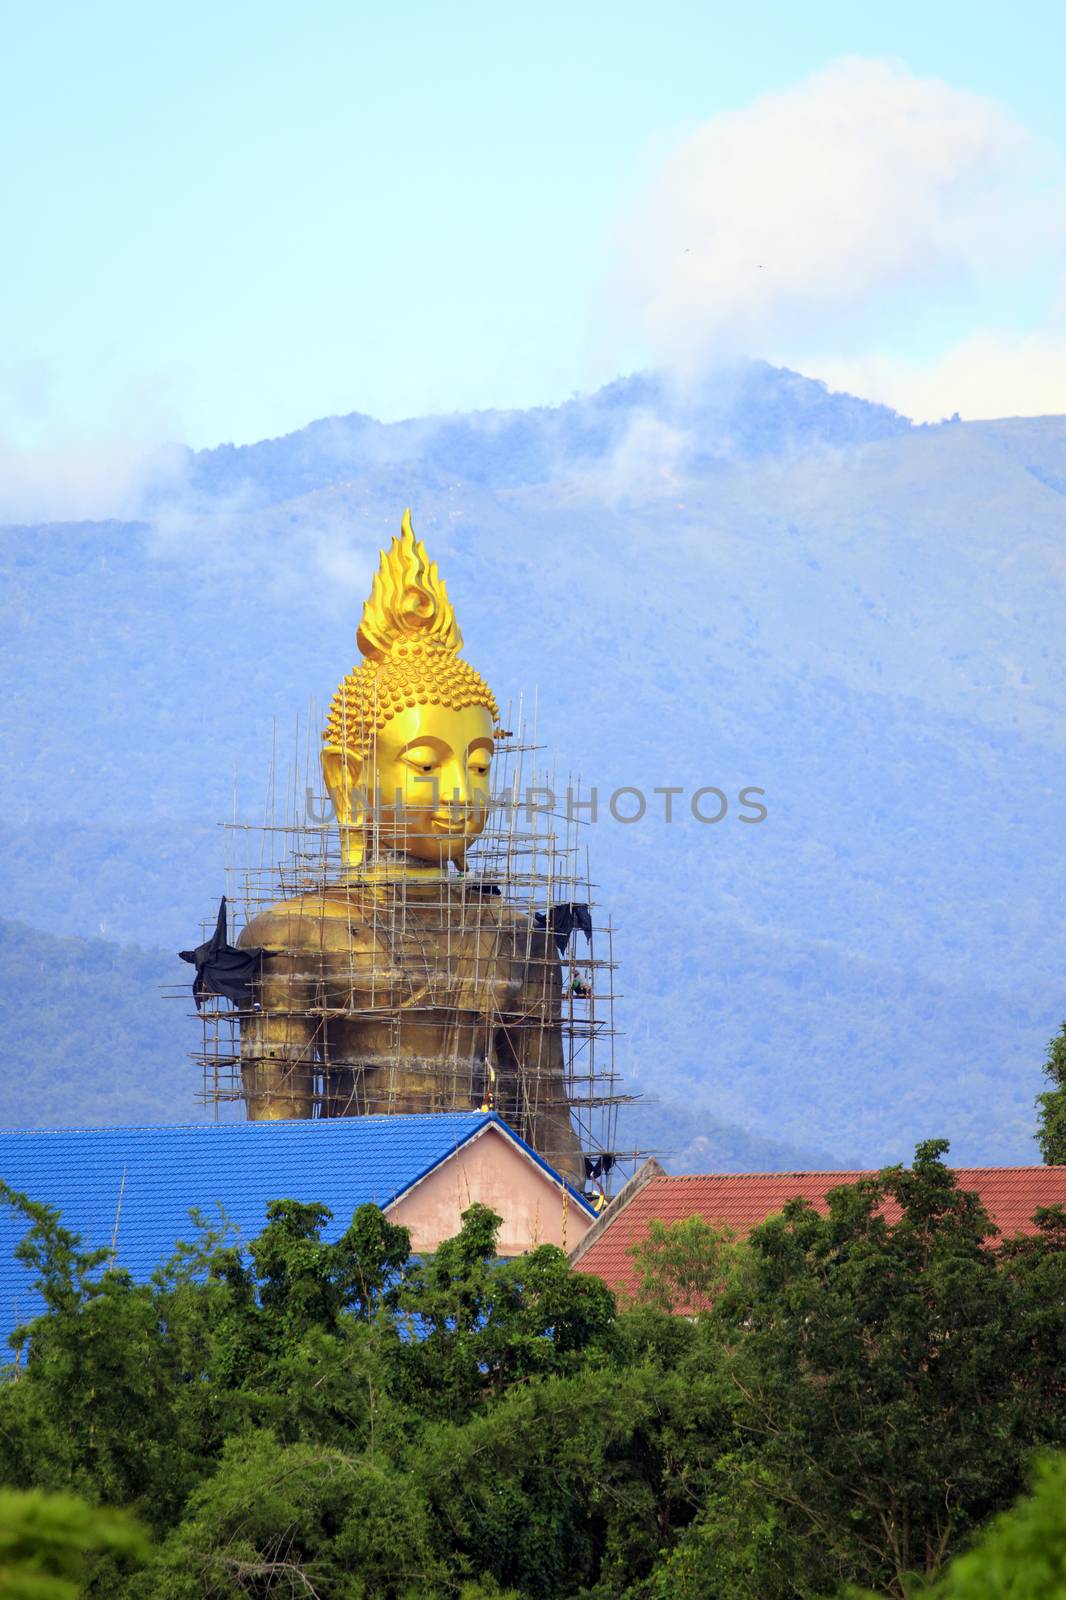 The Buddha is being built. Located in Ban Tak, Tak Province, Thailand.